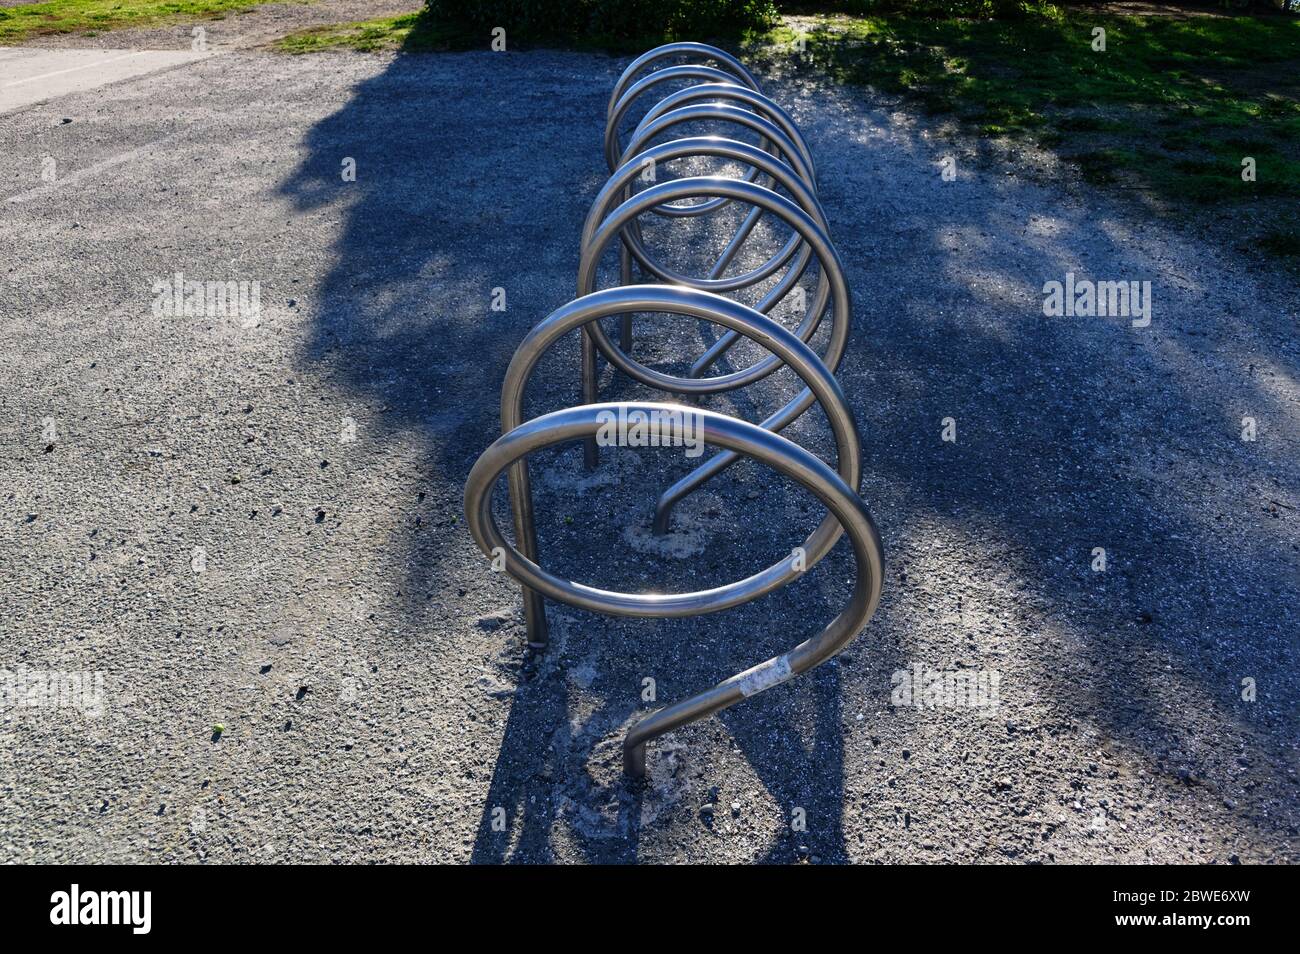 A bicycle rack or bike stand which is stylishly curved in silver metal Stock Photo